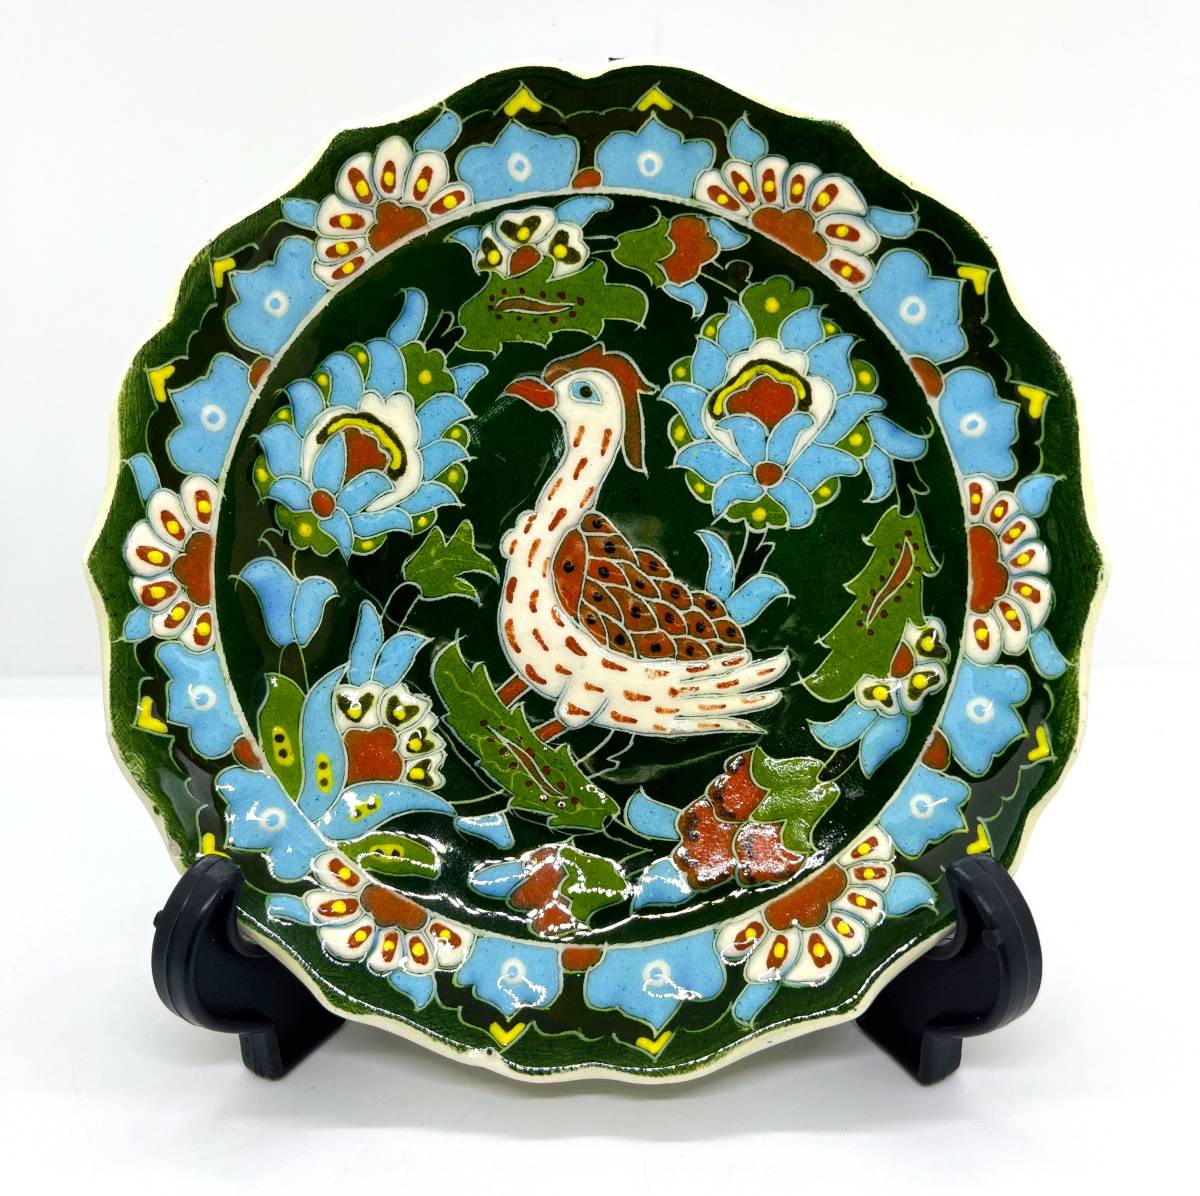 Turkish pottery, painted, handmade, decorative plate, bird, antique tableware/2545, Western-style tableware, plate, dish, others